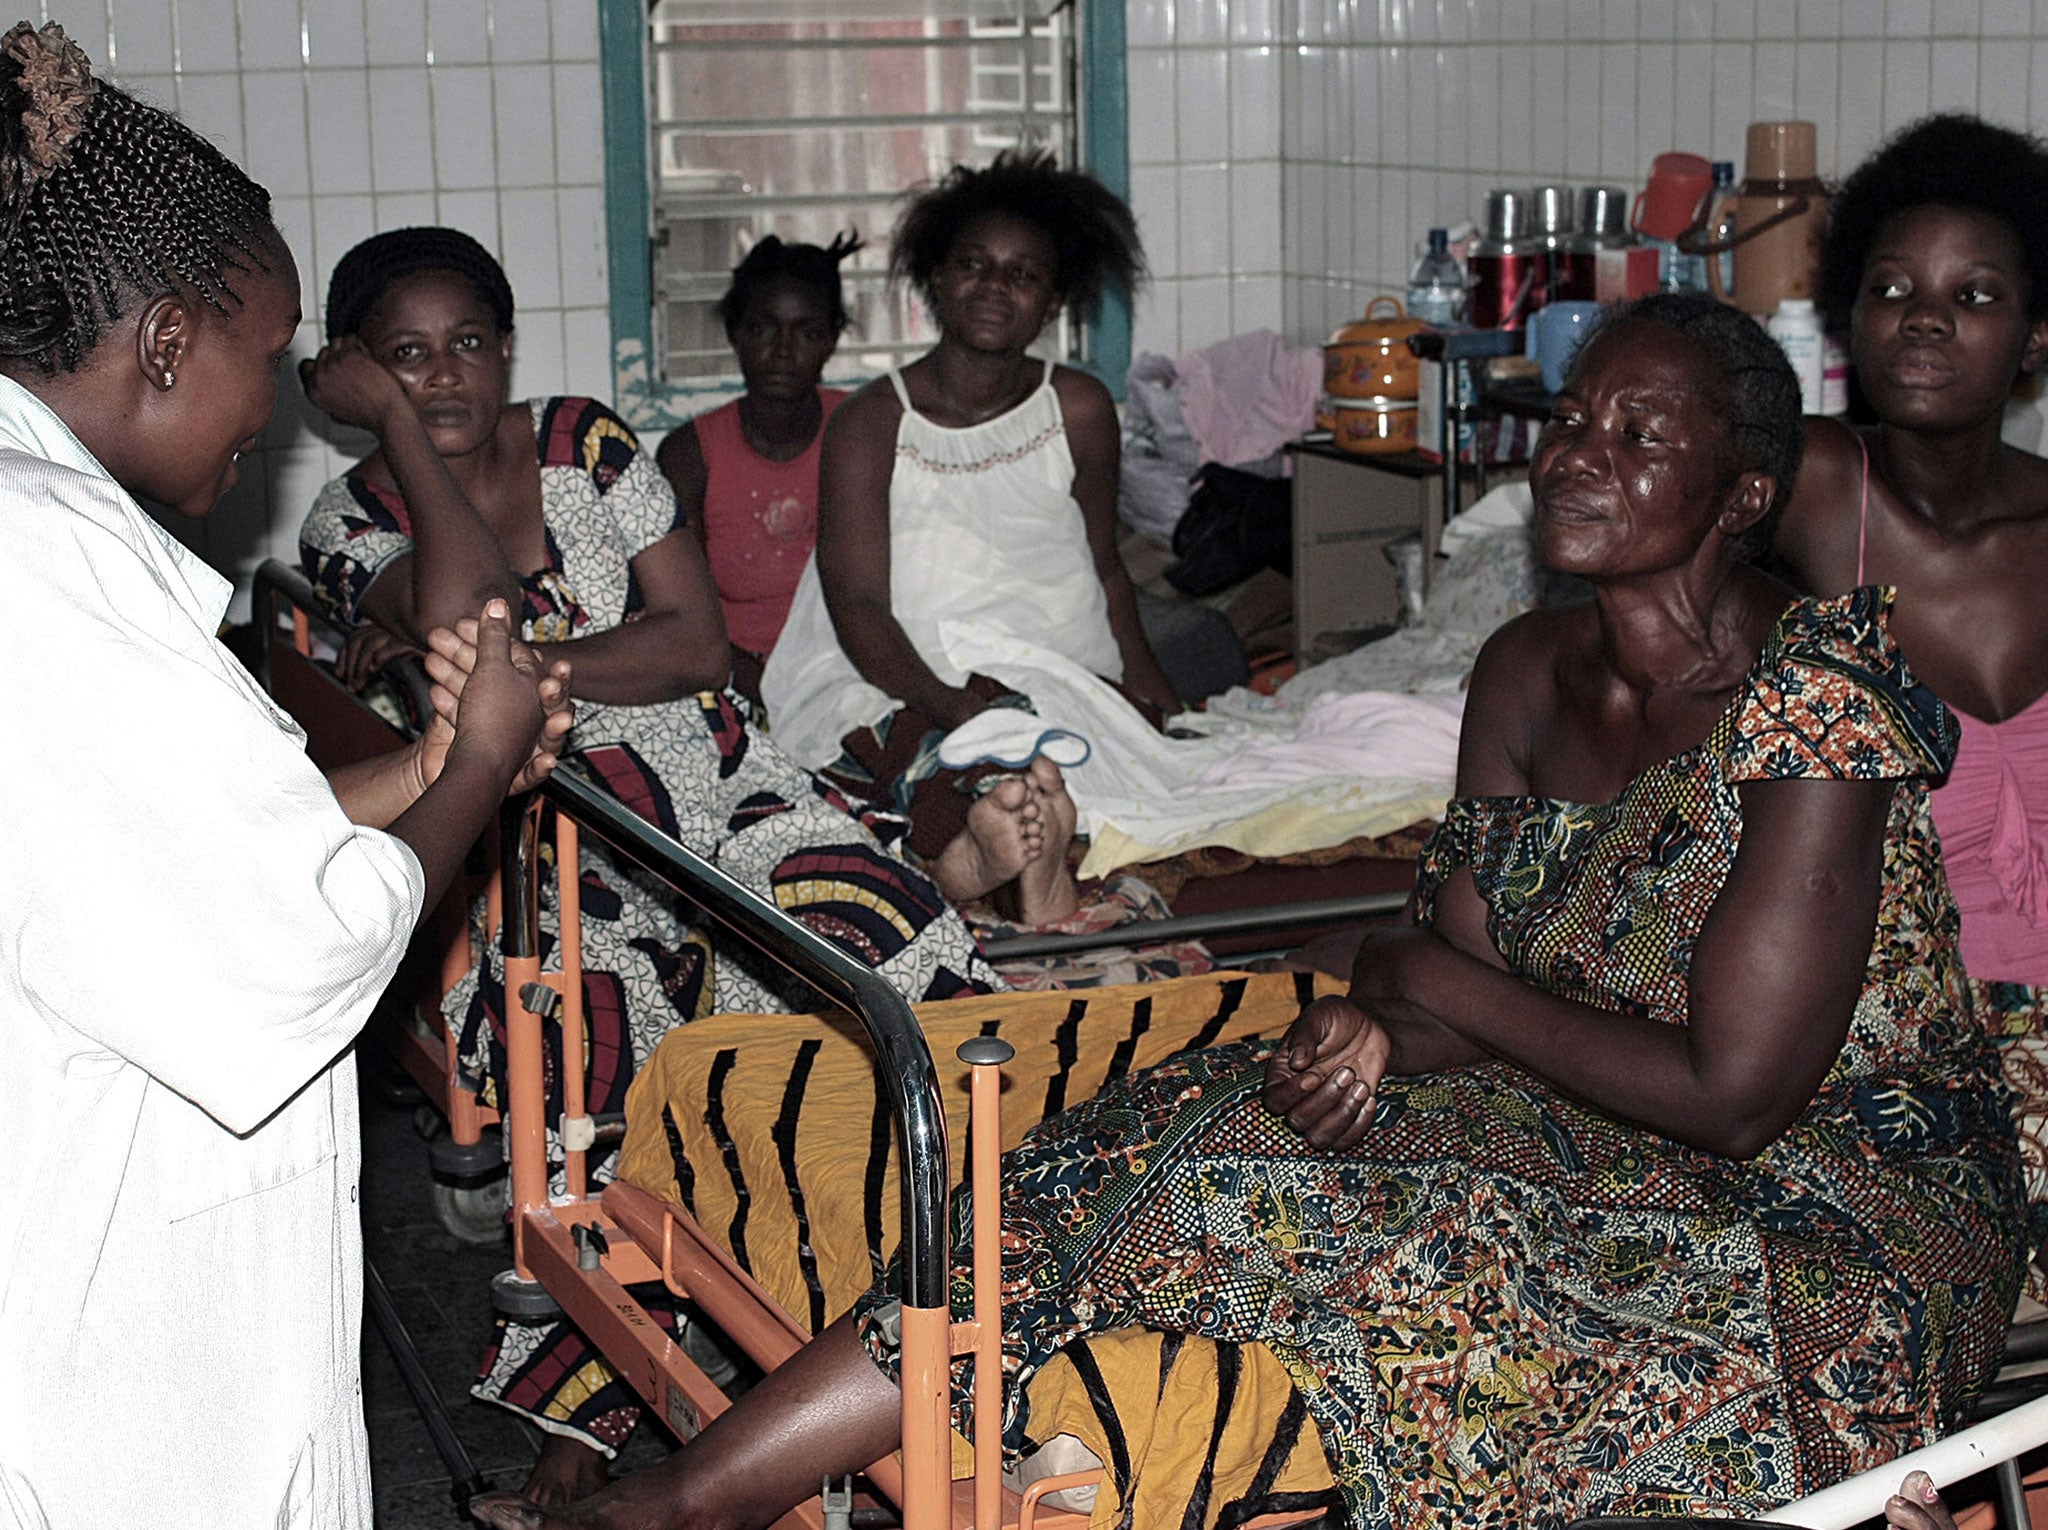 Women admitted into the maternity ward at Roi Baudoin hospital in Kinshasa are counselled by a staff member after they've been detained at the hospital for non-payment of medical fees, on March 3, 2010. Thousands of new mothers are detained in hopsitals in the Democratic Republic of Congo capital, Kinshasa with authorities estimating that at least 20 per cent of women among up to 200 patients-a-month admitted into labour wards are held in hospitals, for months sometimes, for lack of funds to pay their medical bills following childbirth.